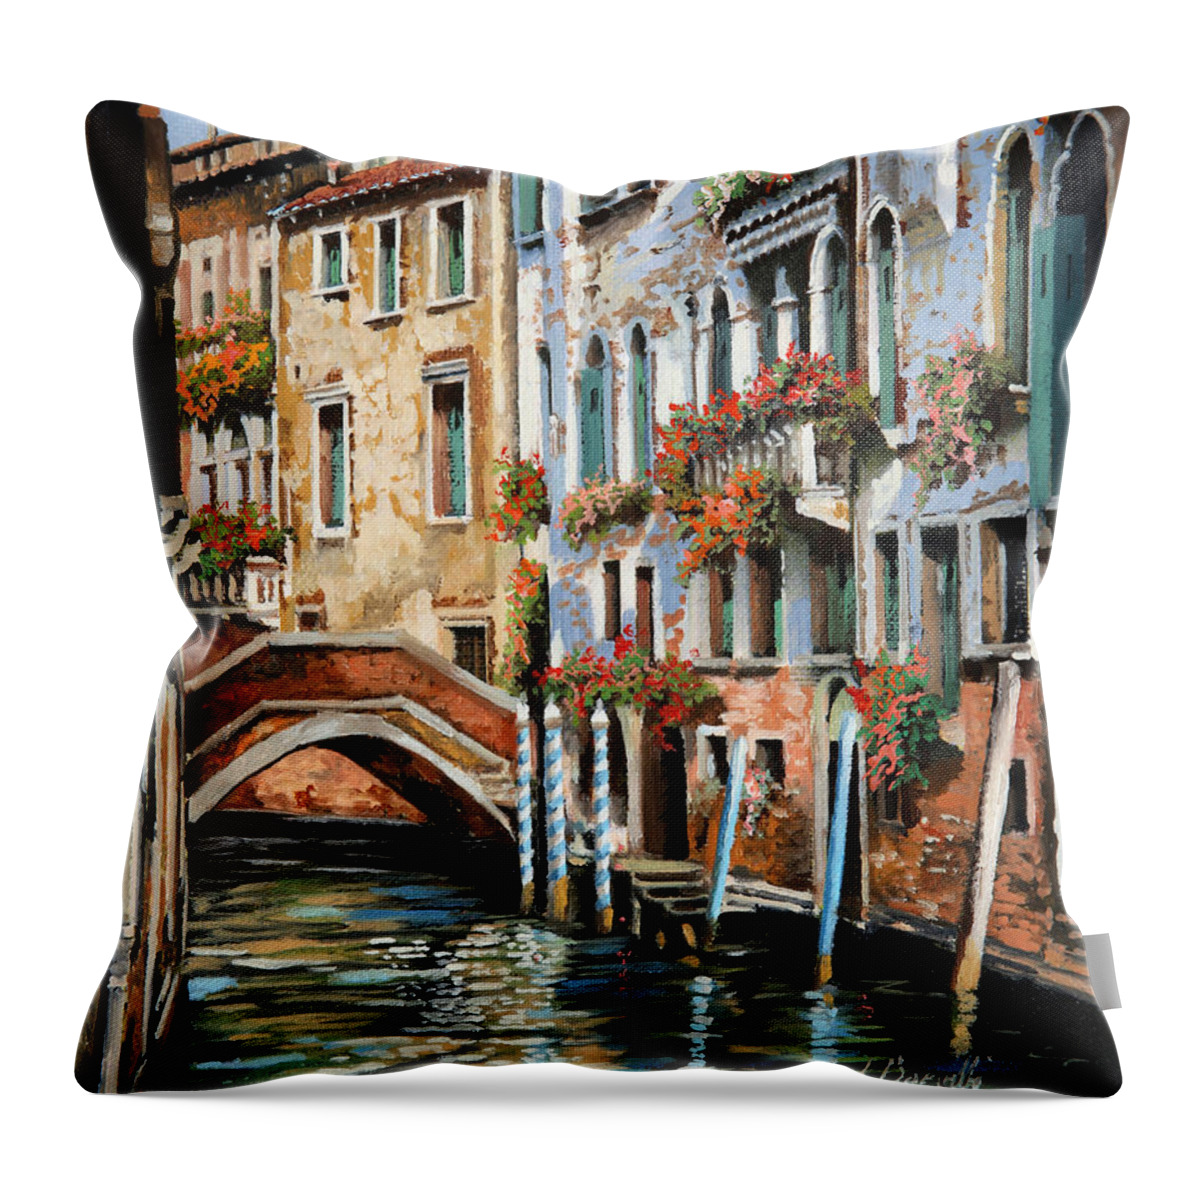 Venice Throw Pillow featuring the painting Il Ponte E I Pali by Guido Borelli